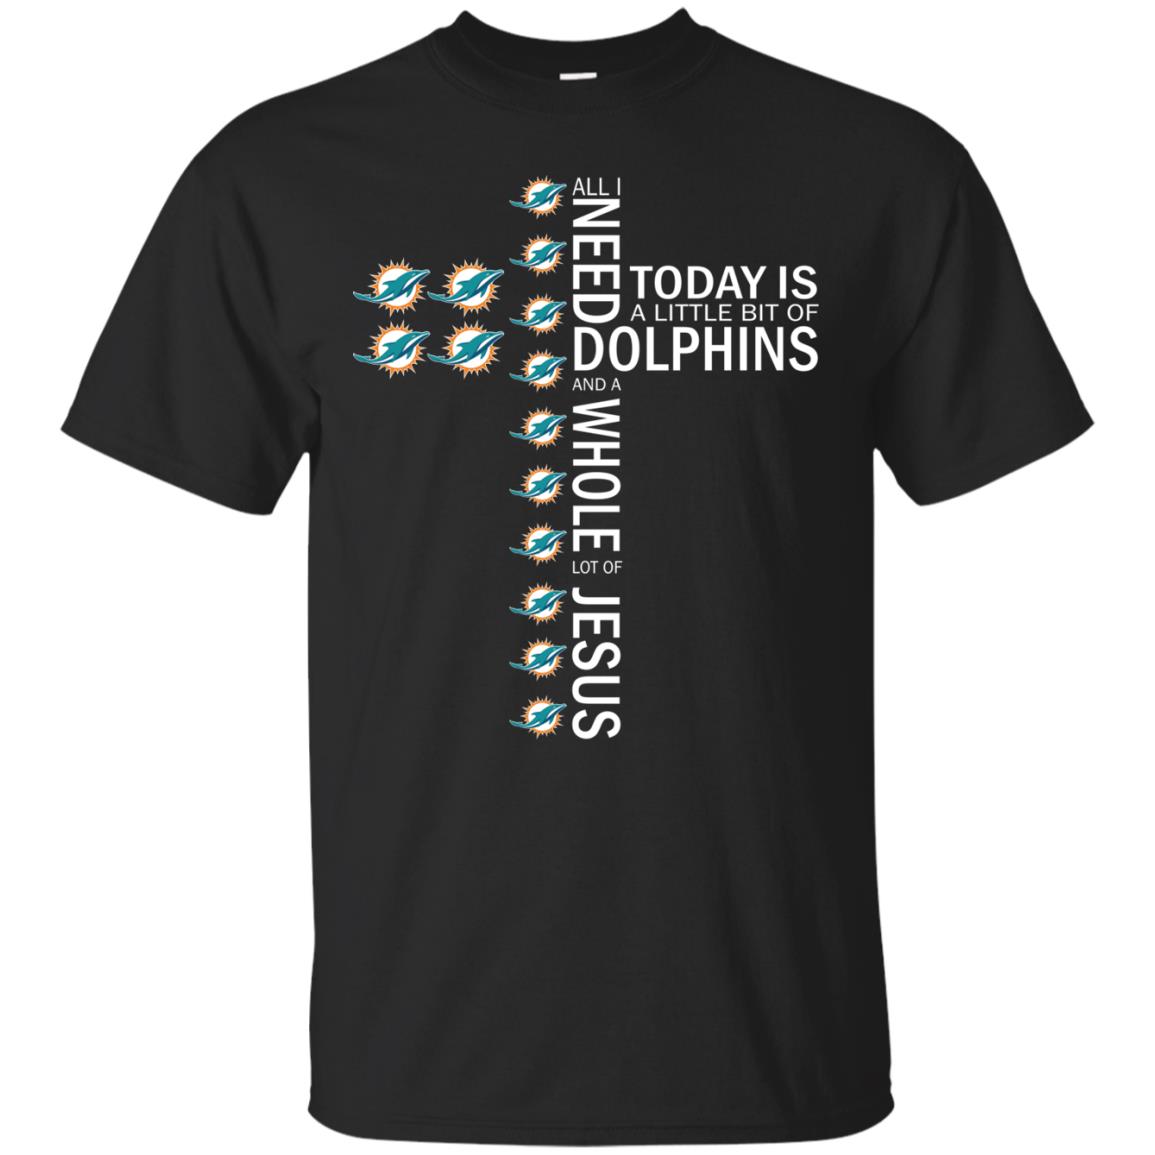 All I Need To Day Is Nfl Dolphins And A Whole Jesus Classic T Shirt